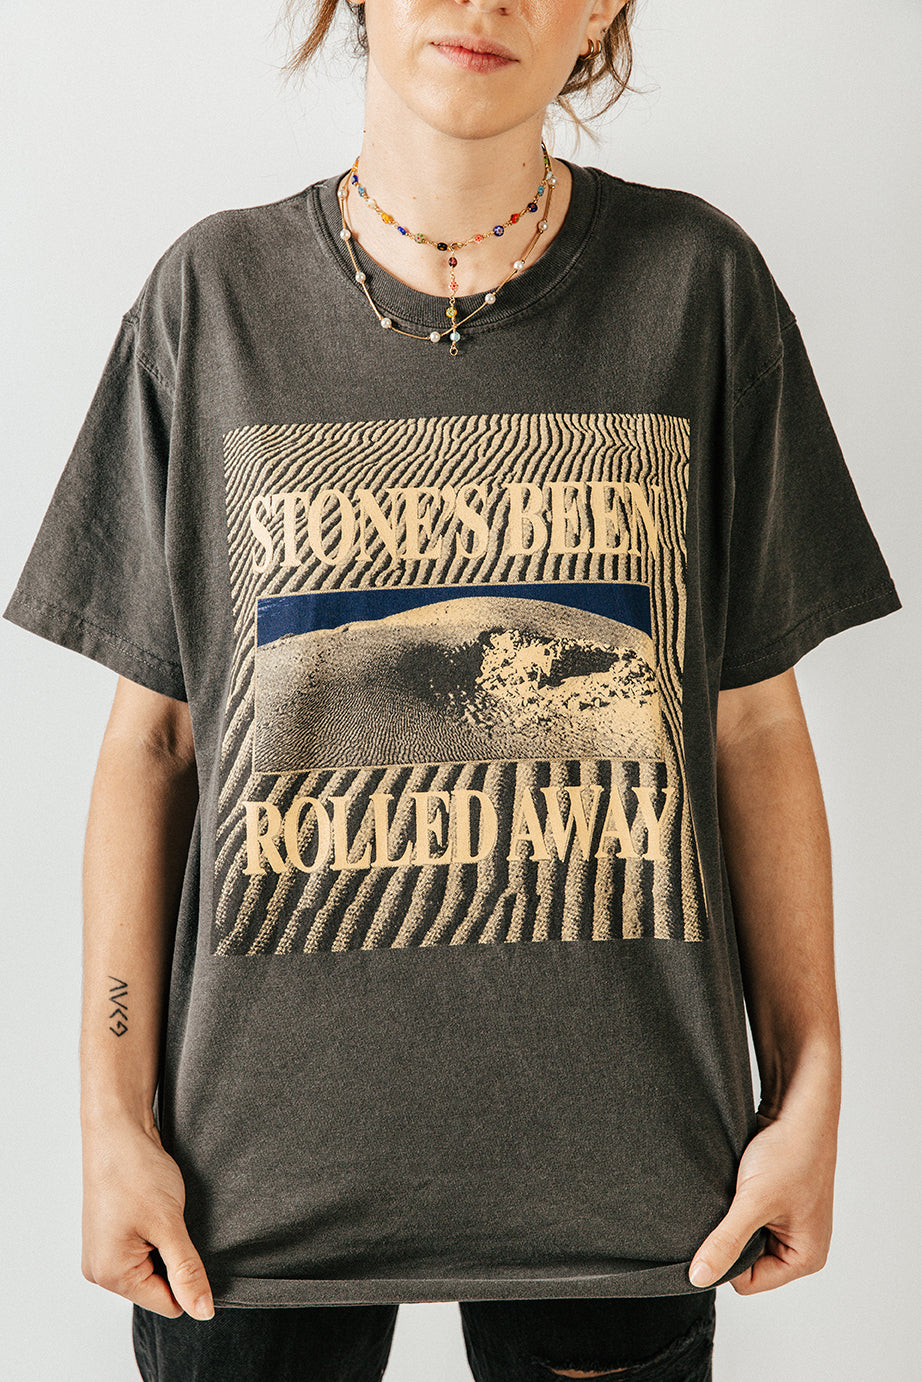 Stone's Been Rolled Away T-Shirt